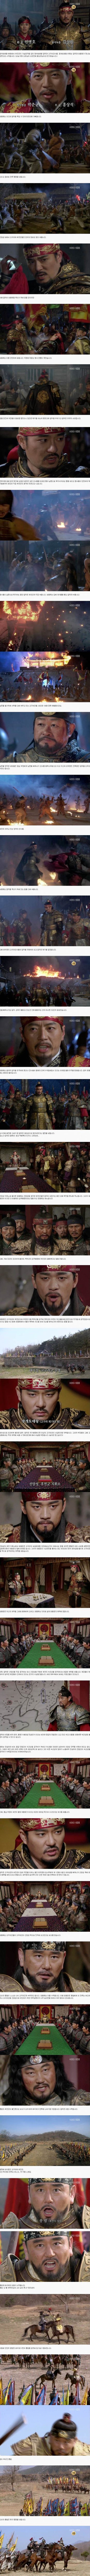 episodes 87 and 88 captures for the Korean drama 'Gwanggaeto the Great'